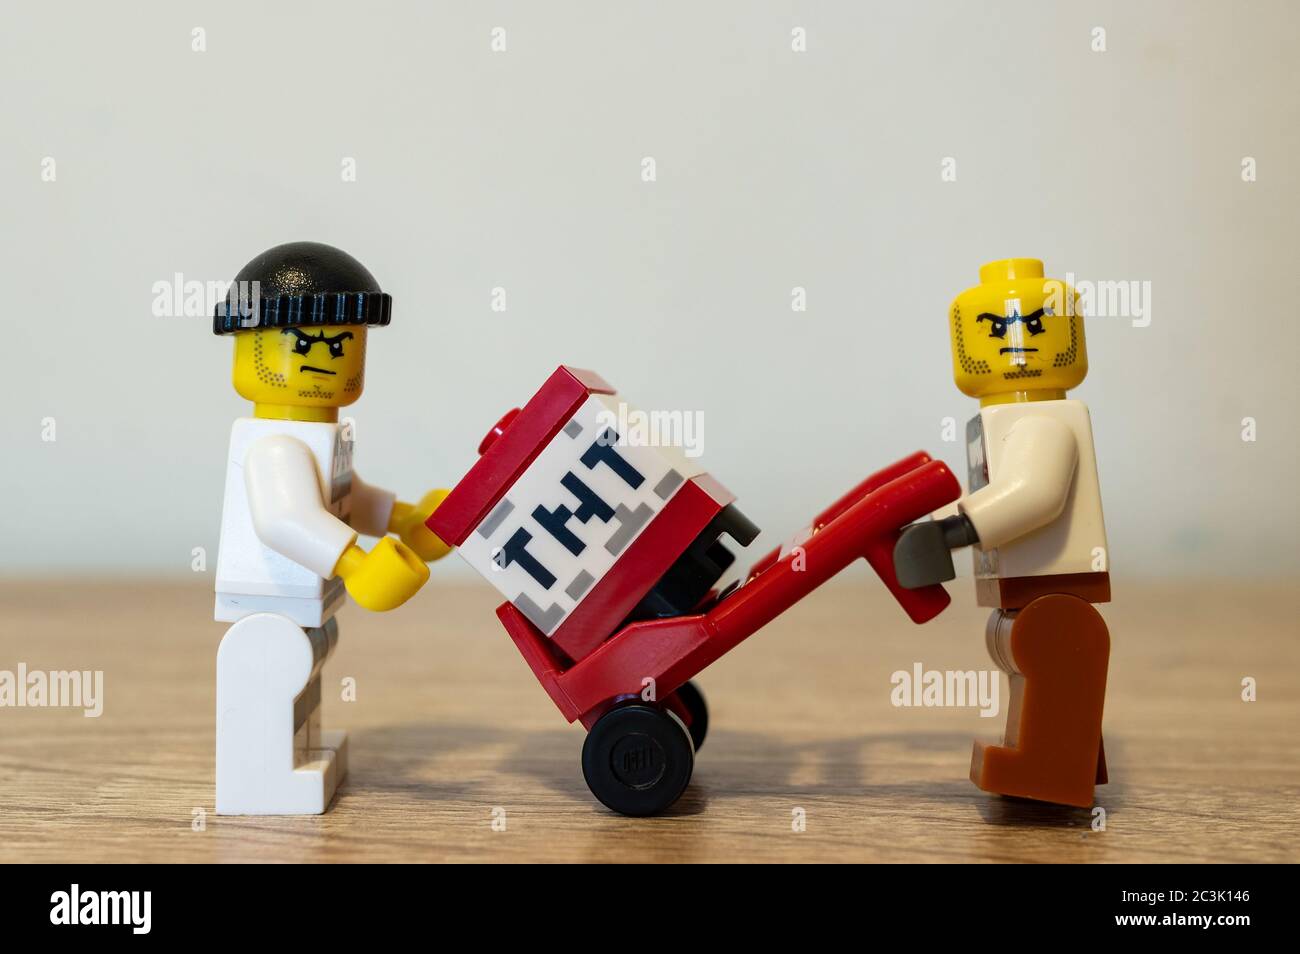 POZNAN, POLAND - May 01, 2020: Two Lego prisoners transporting TNT explosives with a red cart. Stock Photo